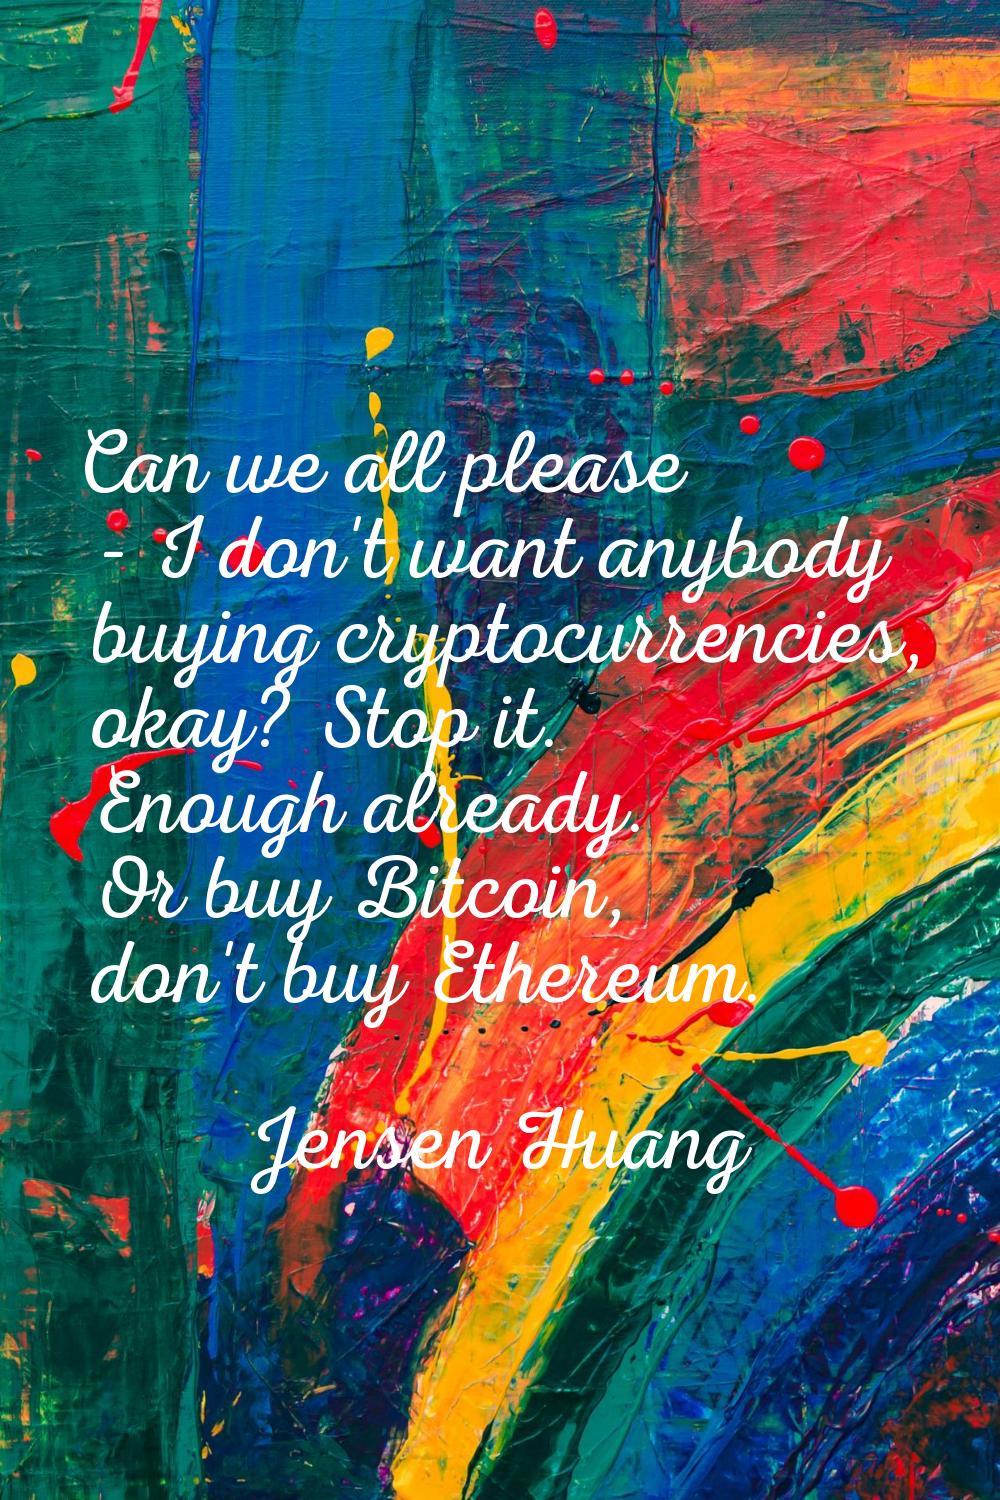 Can we all please - I don't want anybody buying cryptocurrencies, okay? Stop it. Enough already. Or